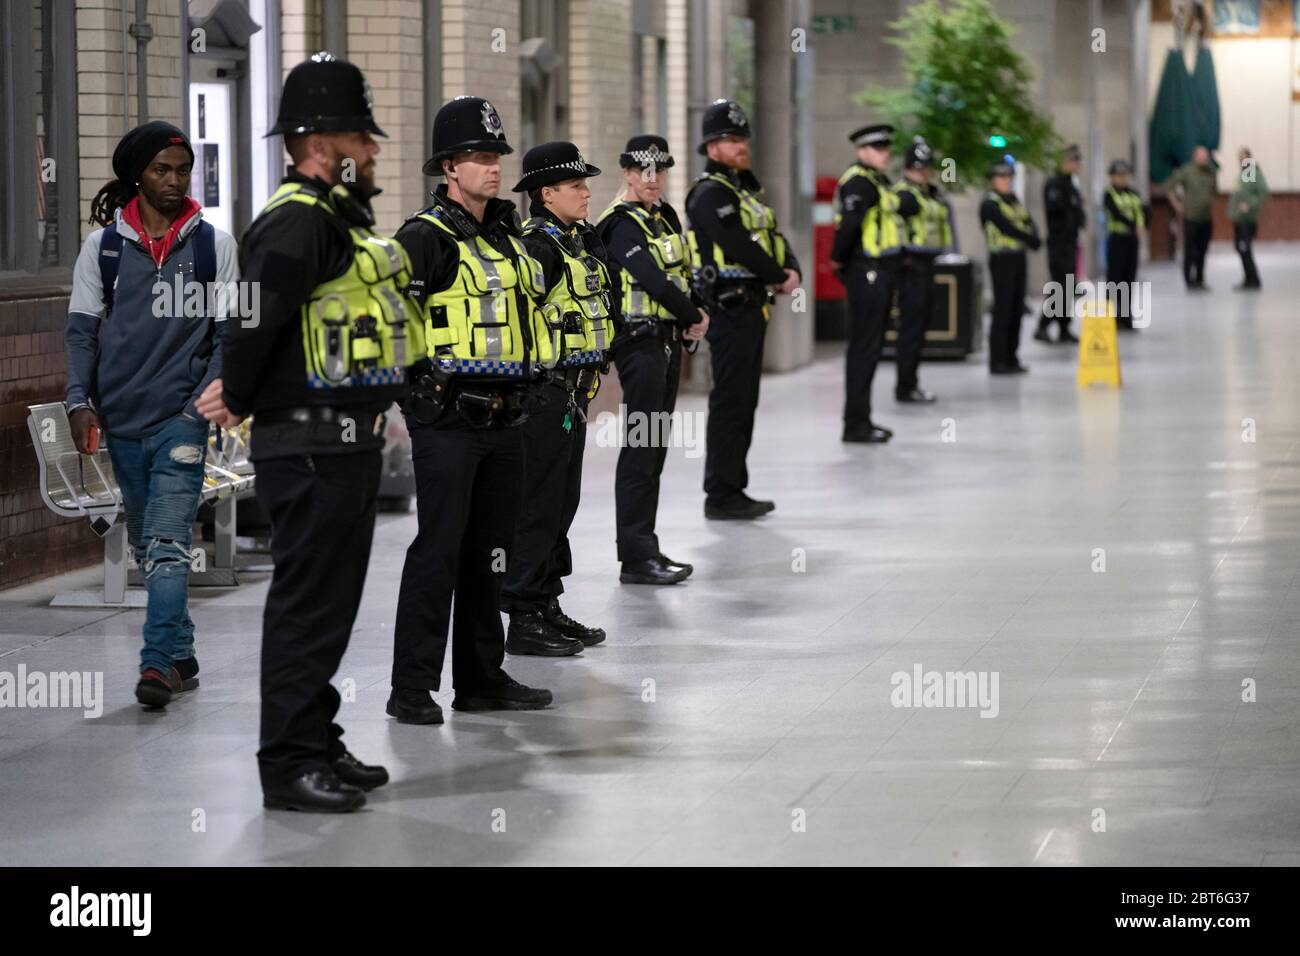 Manchester, UK. 22nd May, 2020. Police officers stand in line at at Manchester Victoria Railway Station as the Manchester Arena BombÕs 3rd Anniversary is marked with a minuteÕs silence, Manchester, UK. Credit: Jon Super/Alamy Live News. Stock Photo